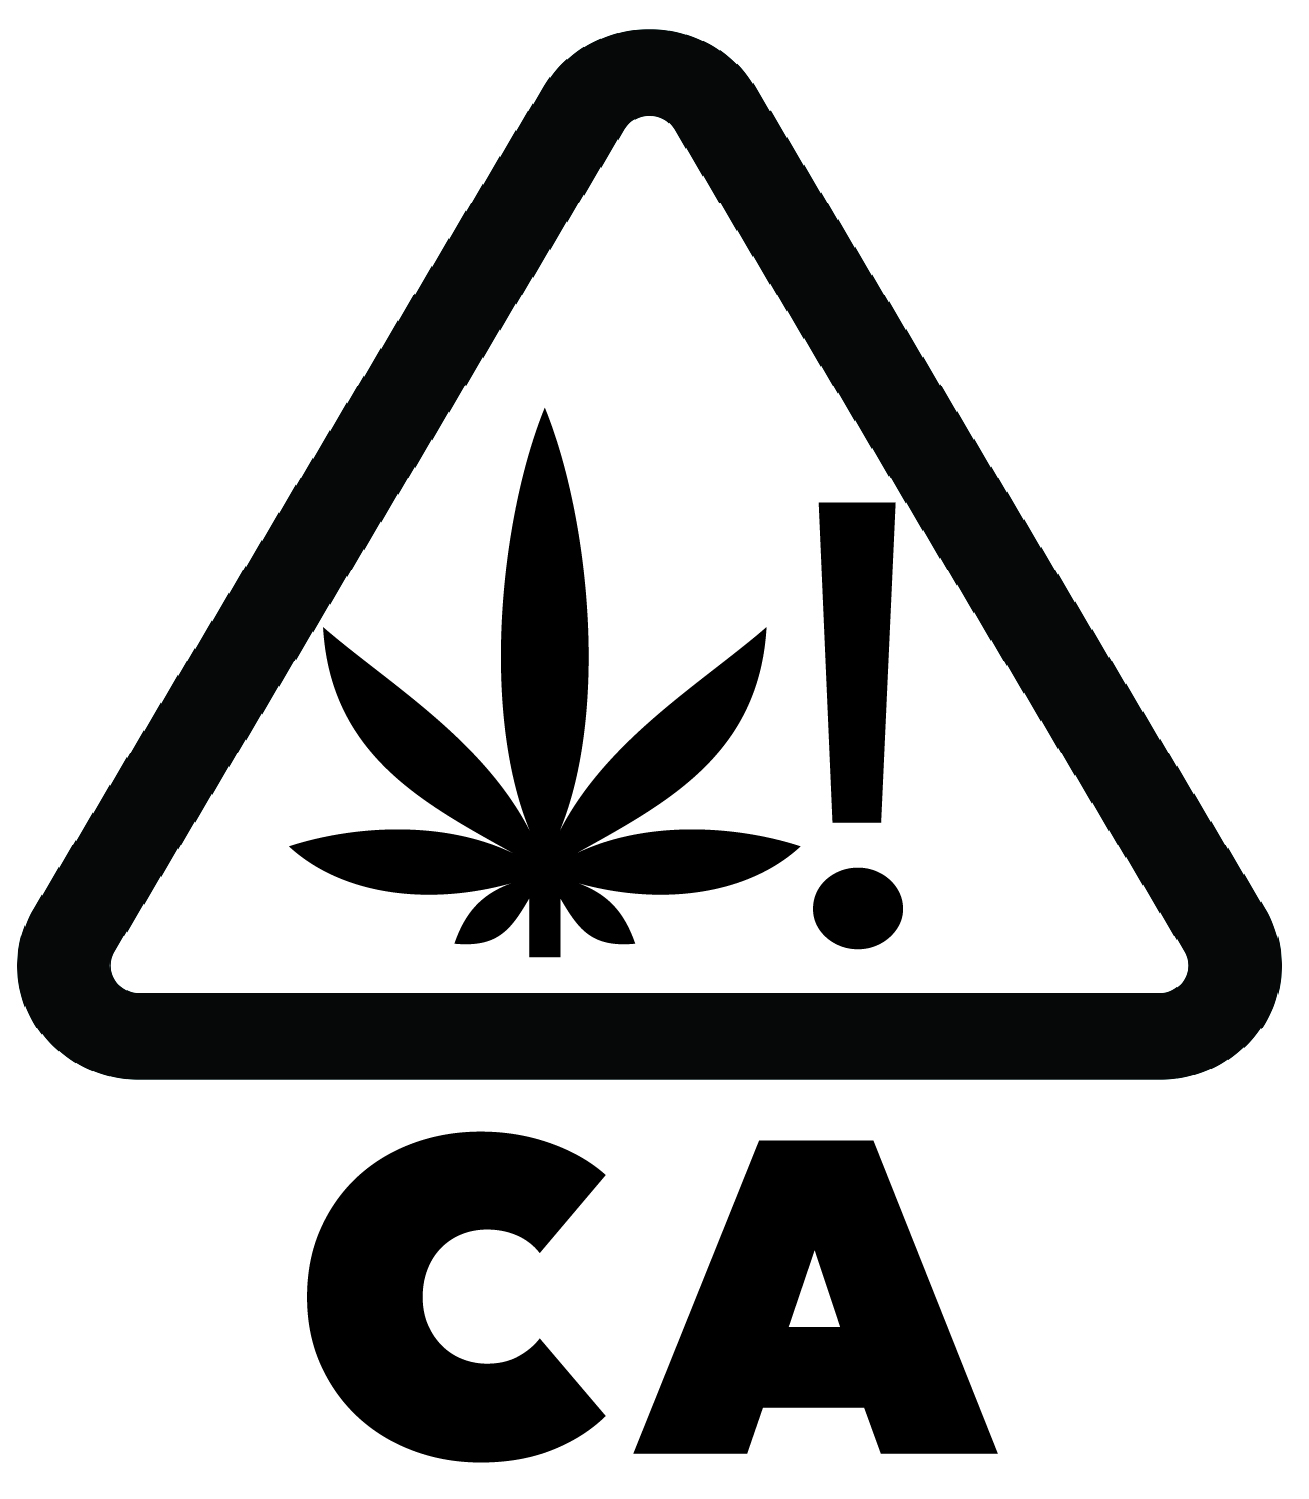 Everything That Is Wrong with California’s Current Legal Cannabis System